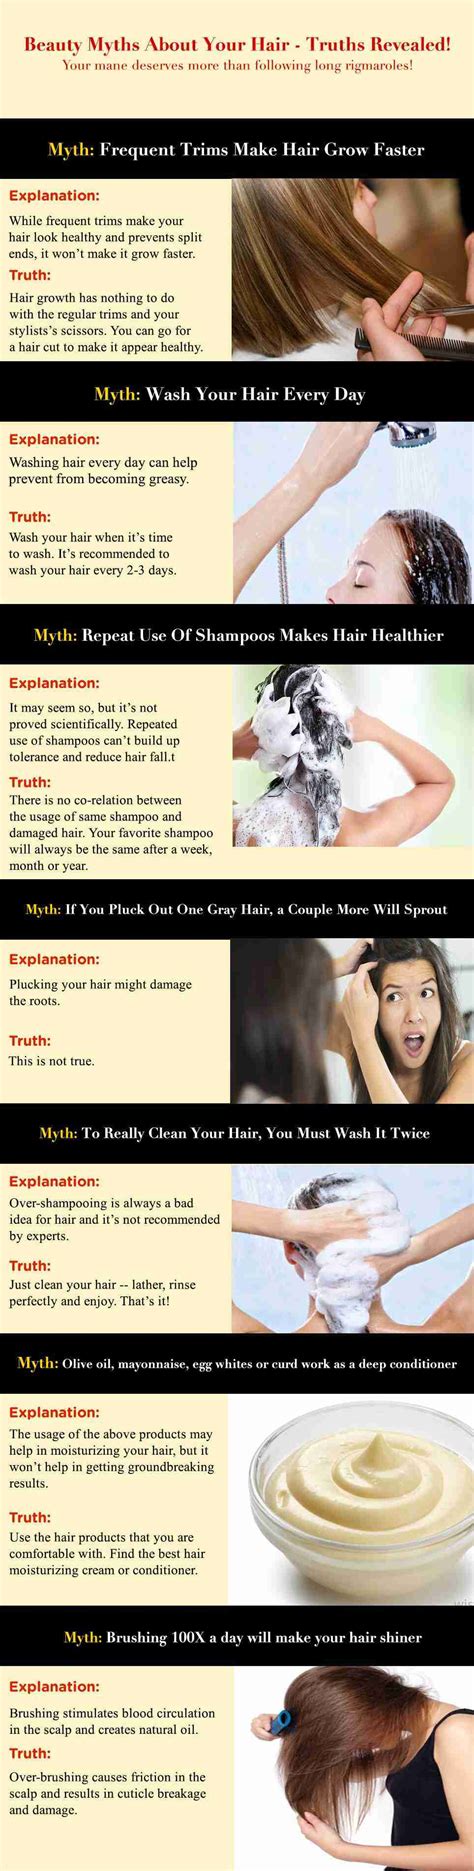 infographic beauty myths   hair truths revealed